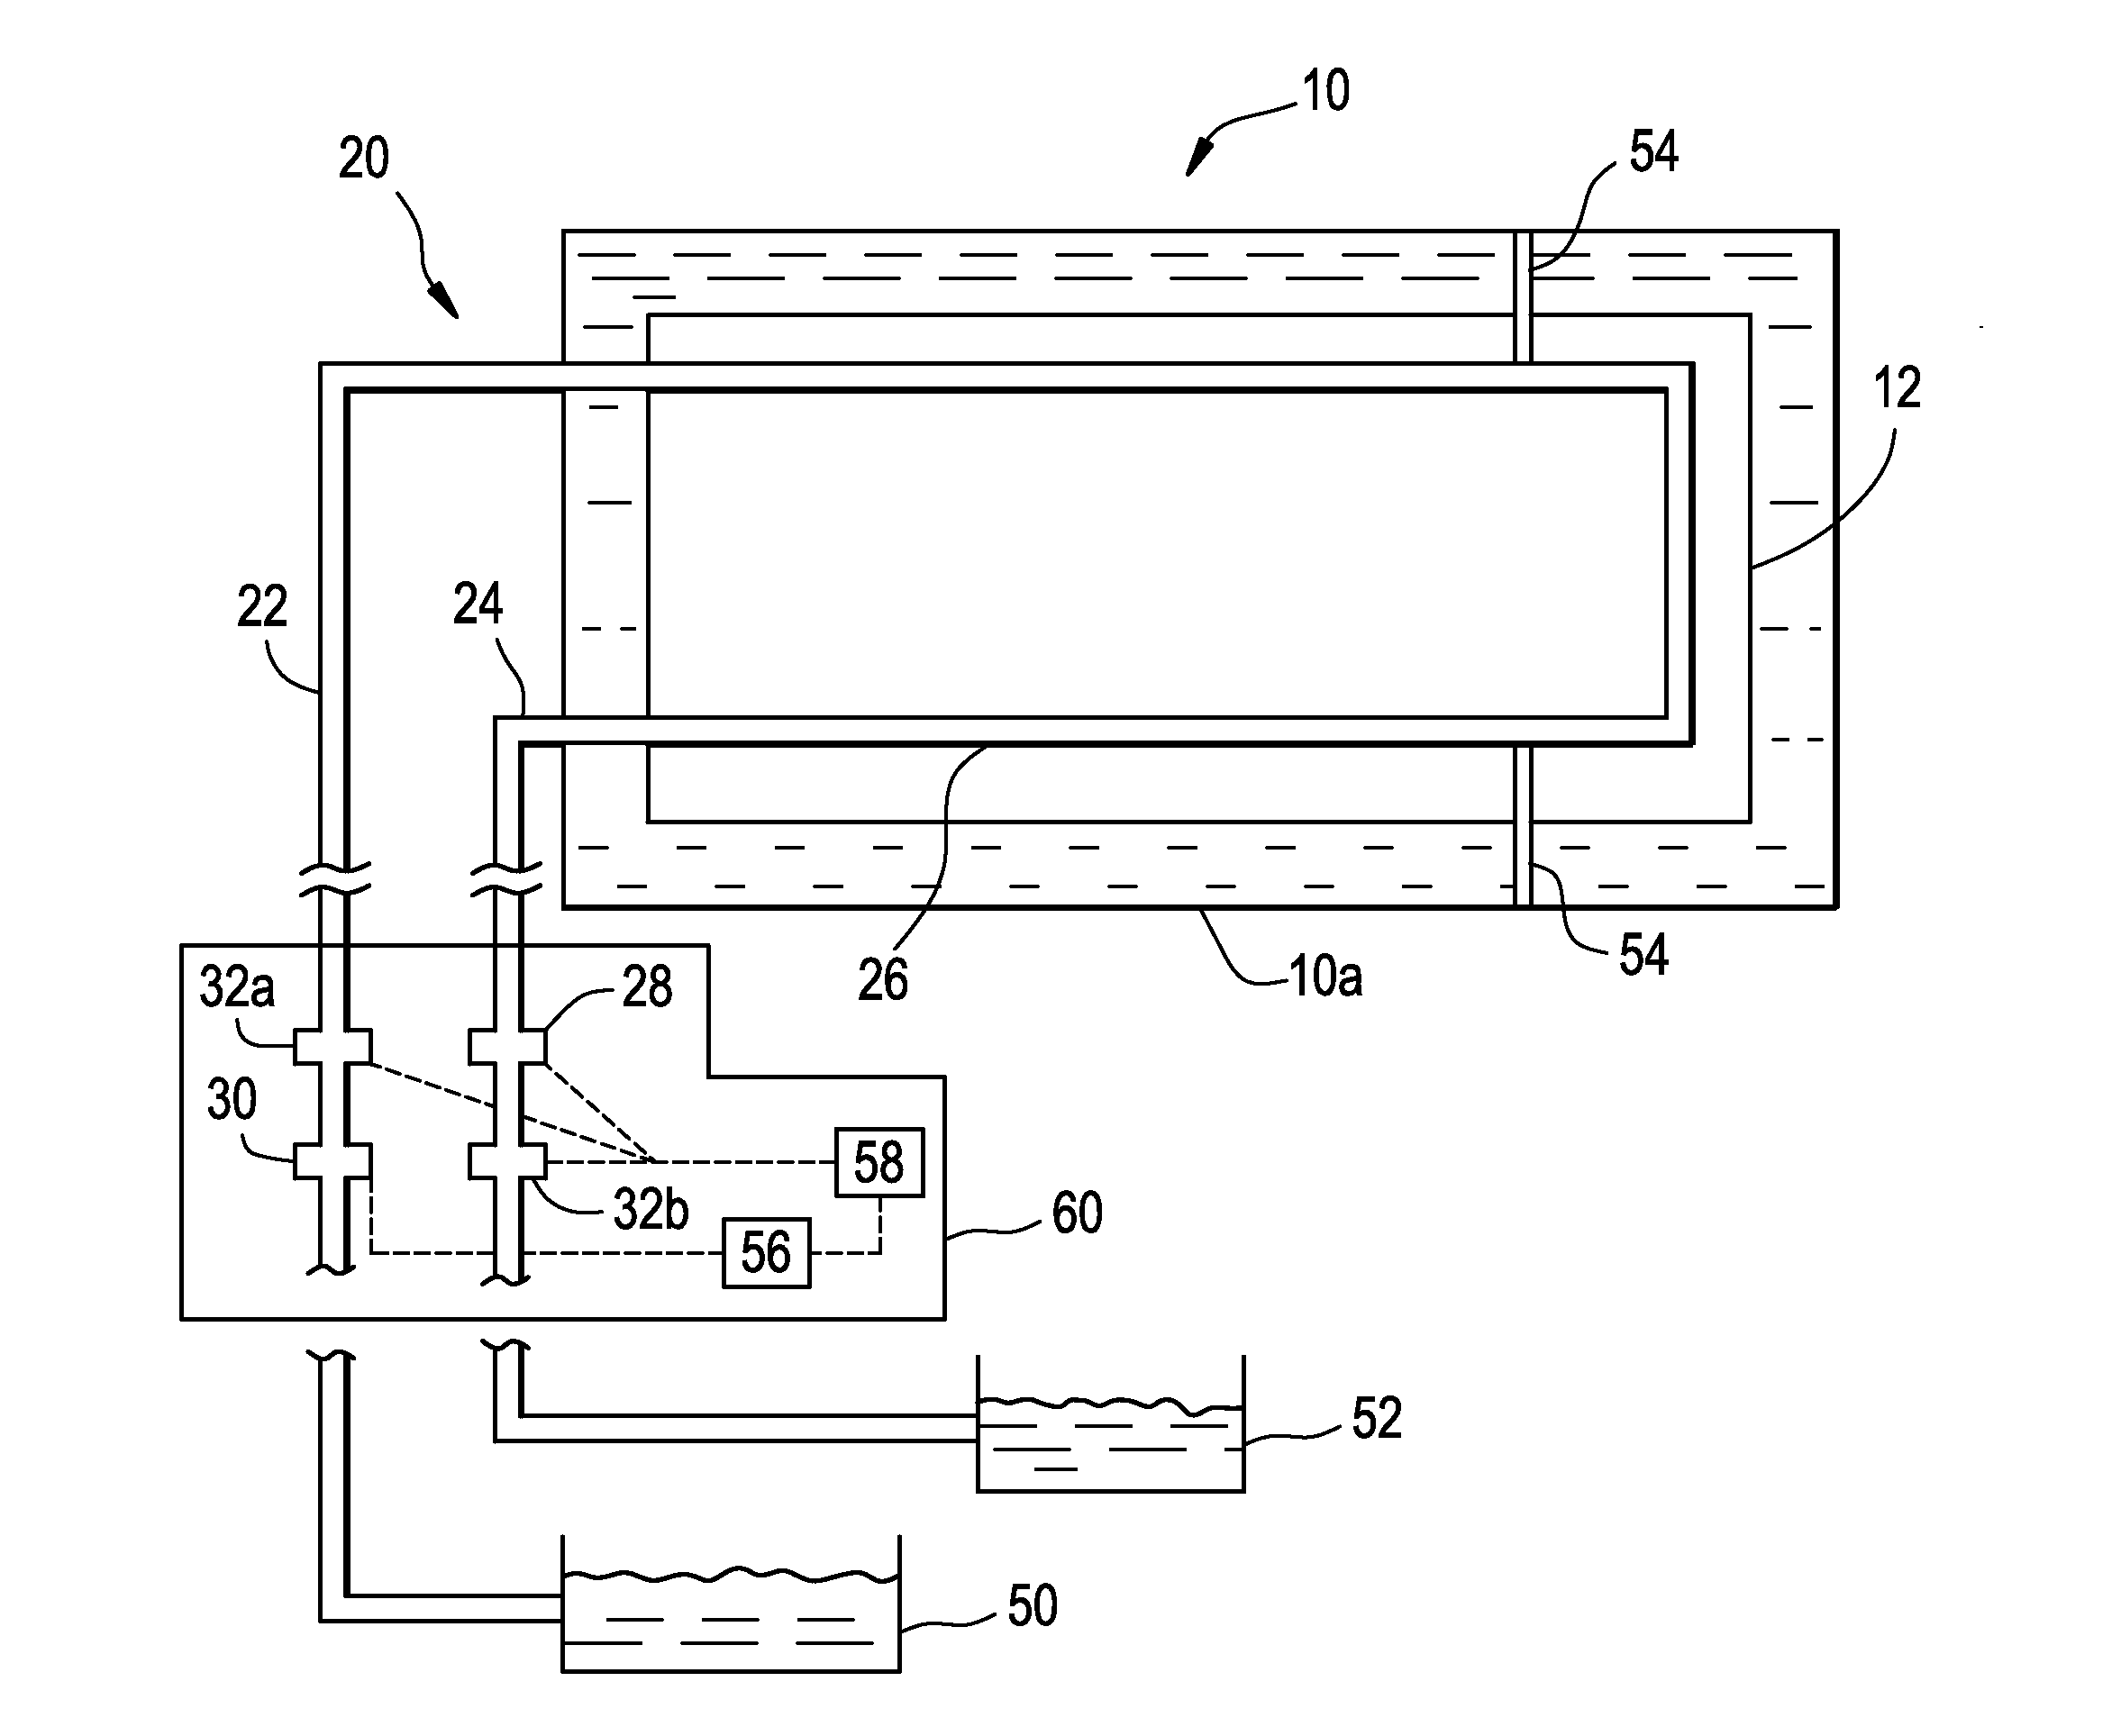 Method and apparatus for an alternative remote spent fuel pool cooling system for light water reactors